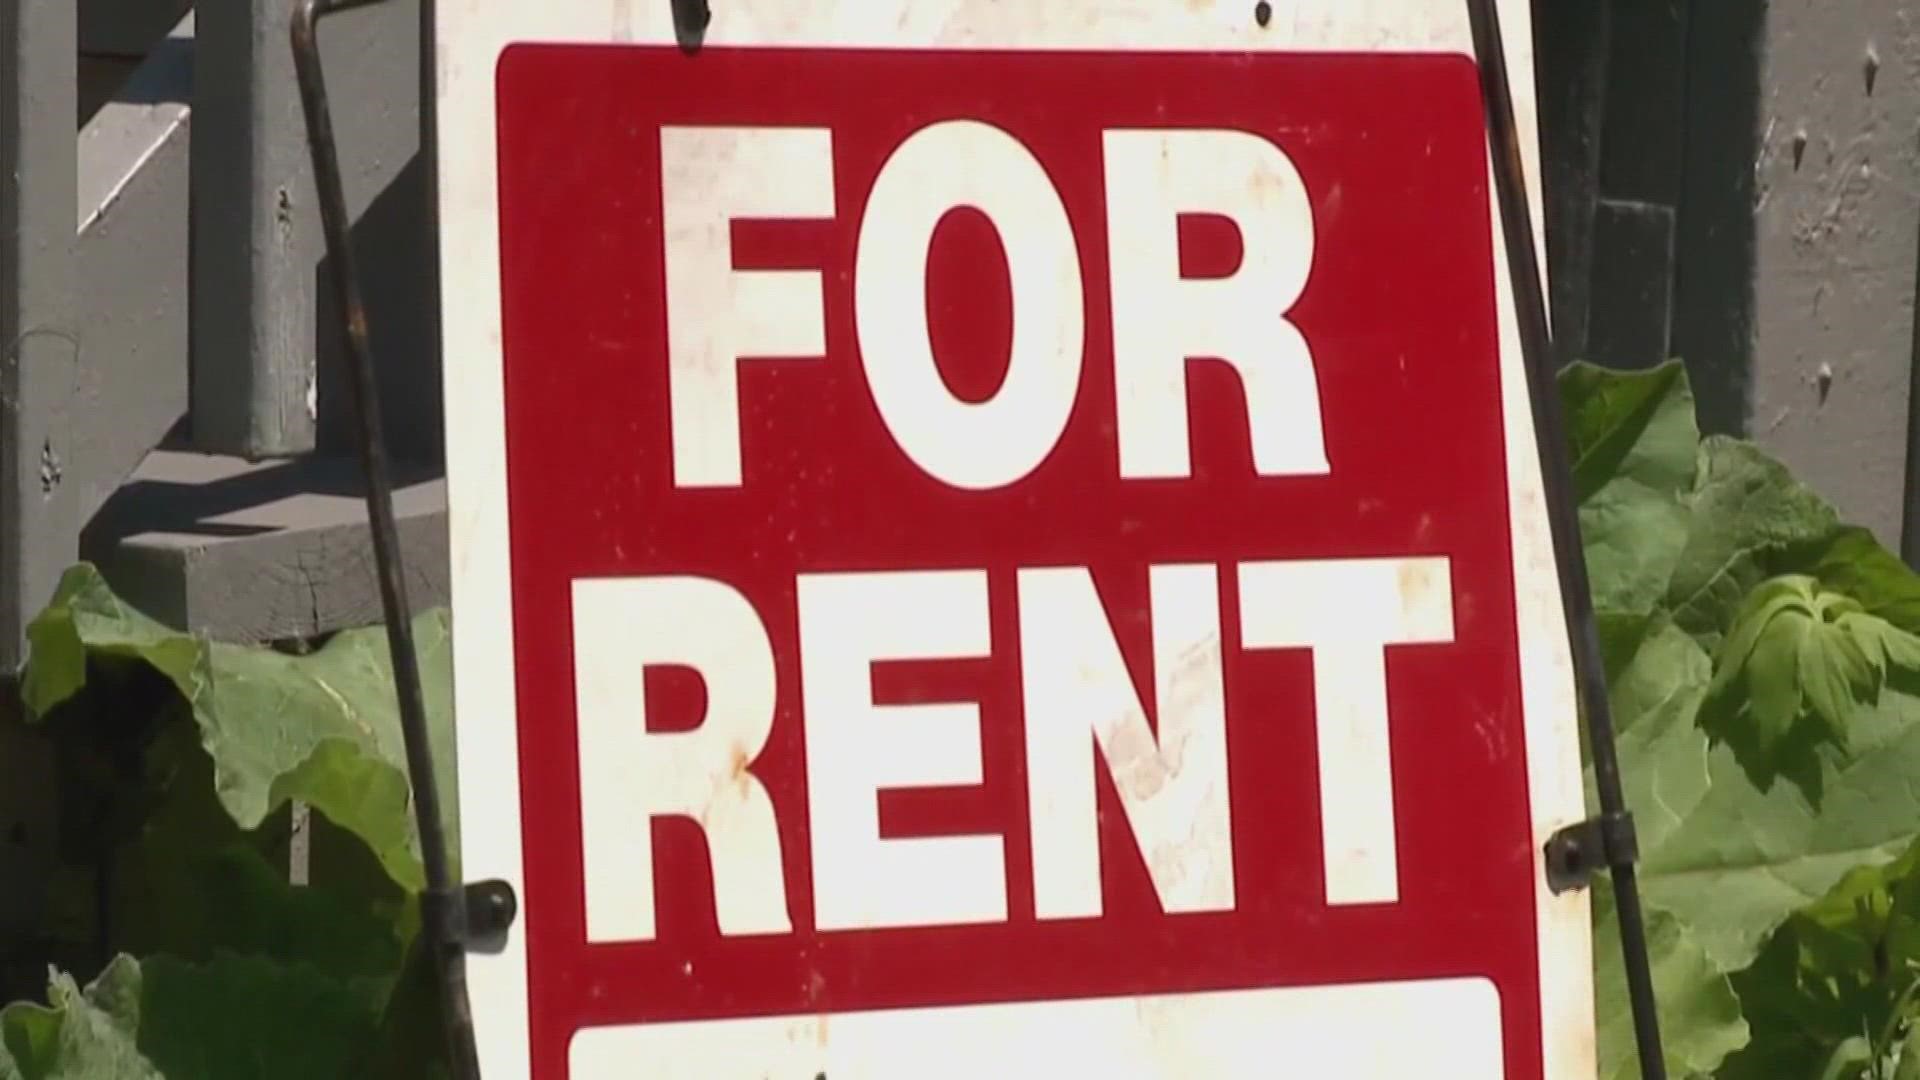 Wednesday is the last day to apply for Forsyth County's Emergency Rental Assistance Program.